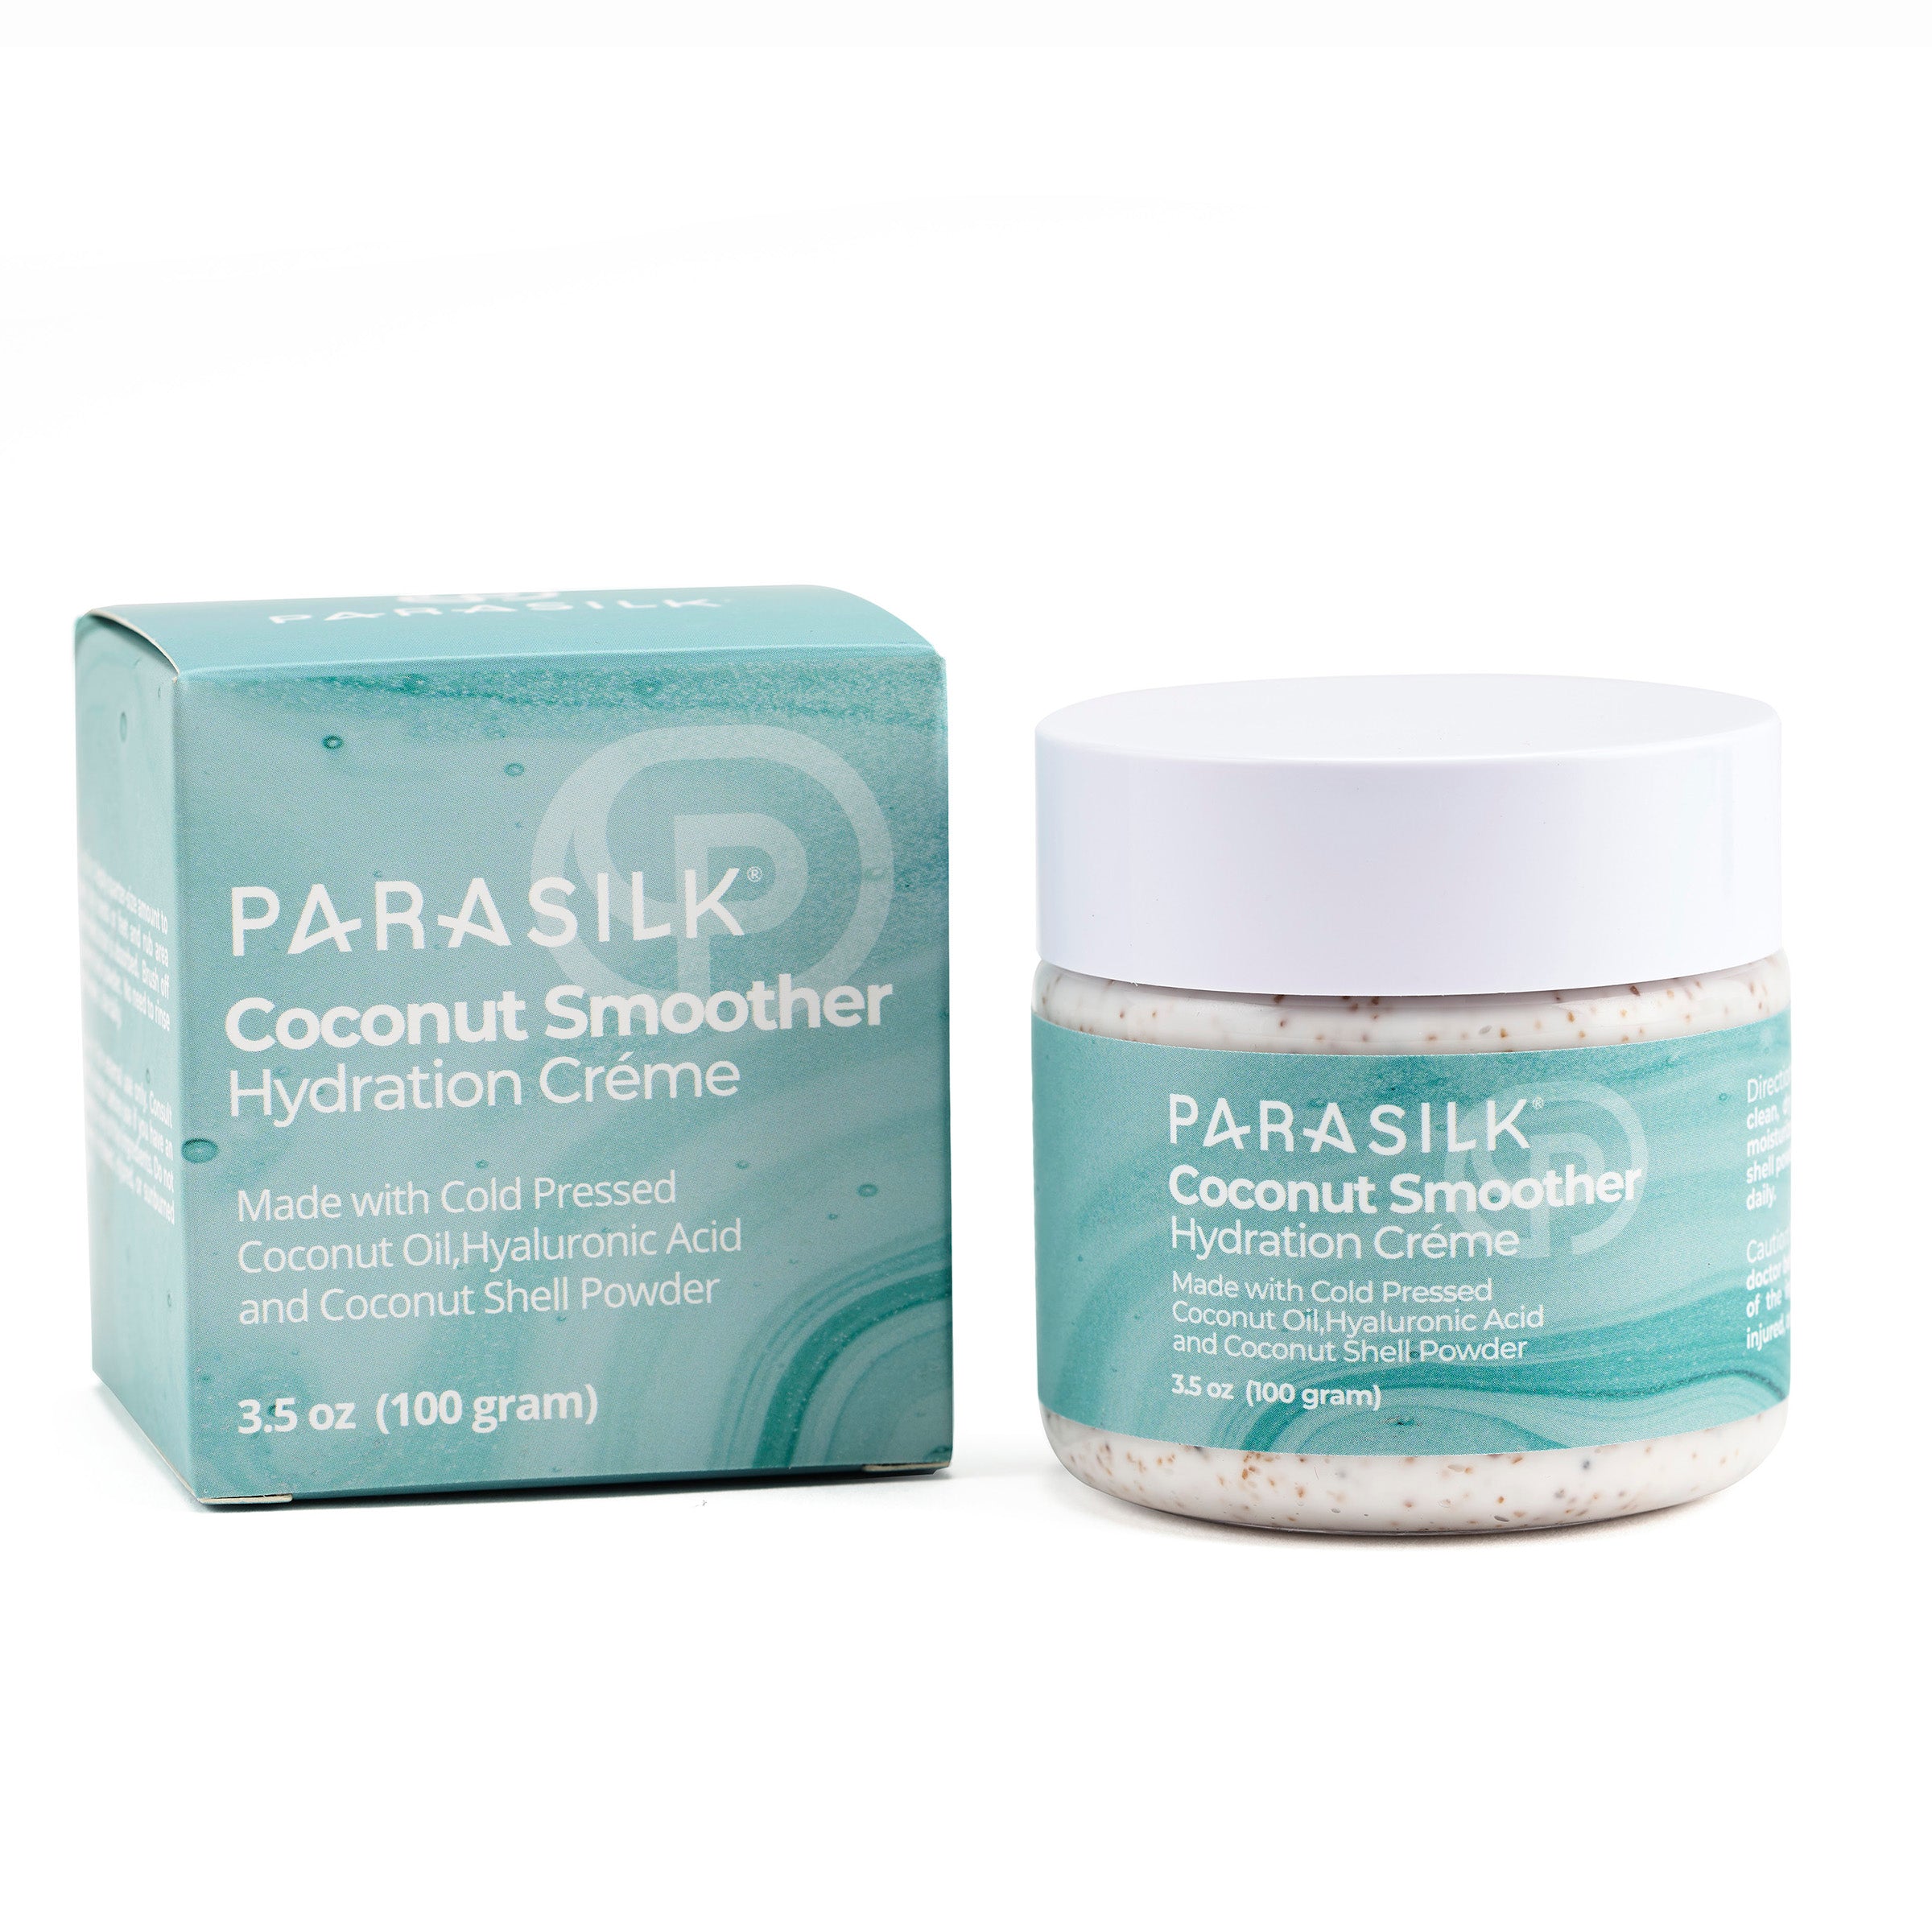 Parasilk coconut smoother hydration creme